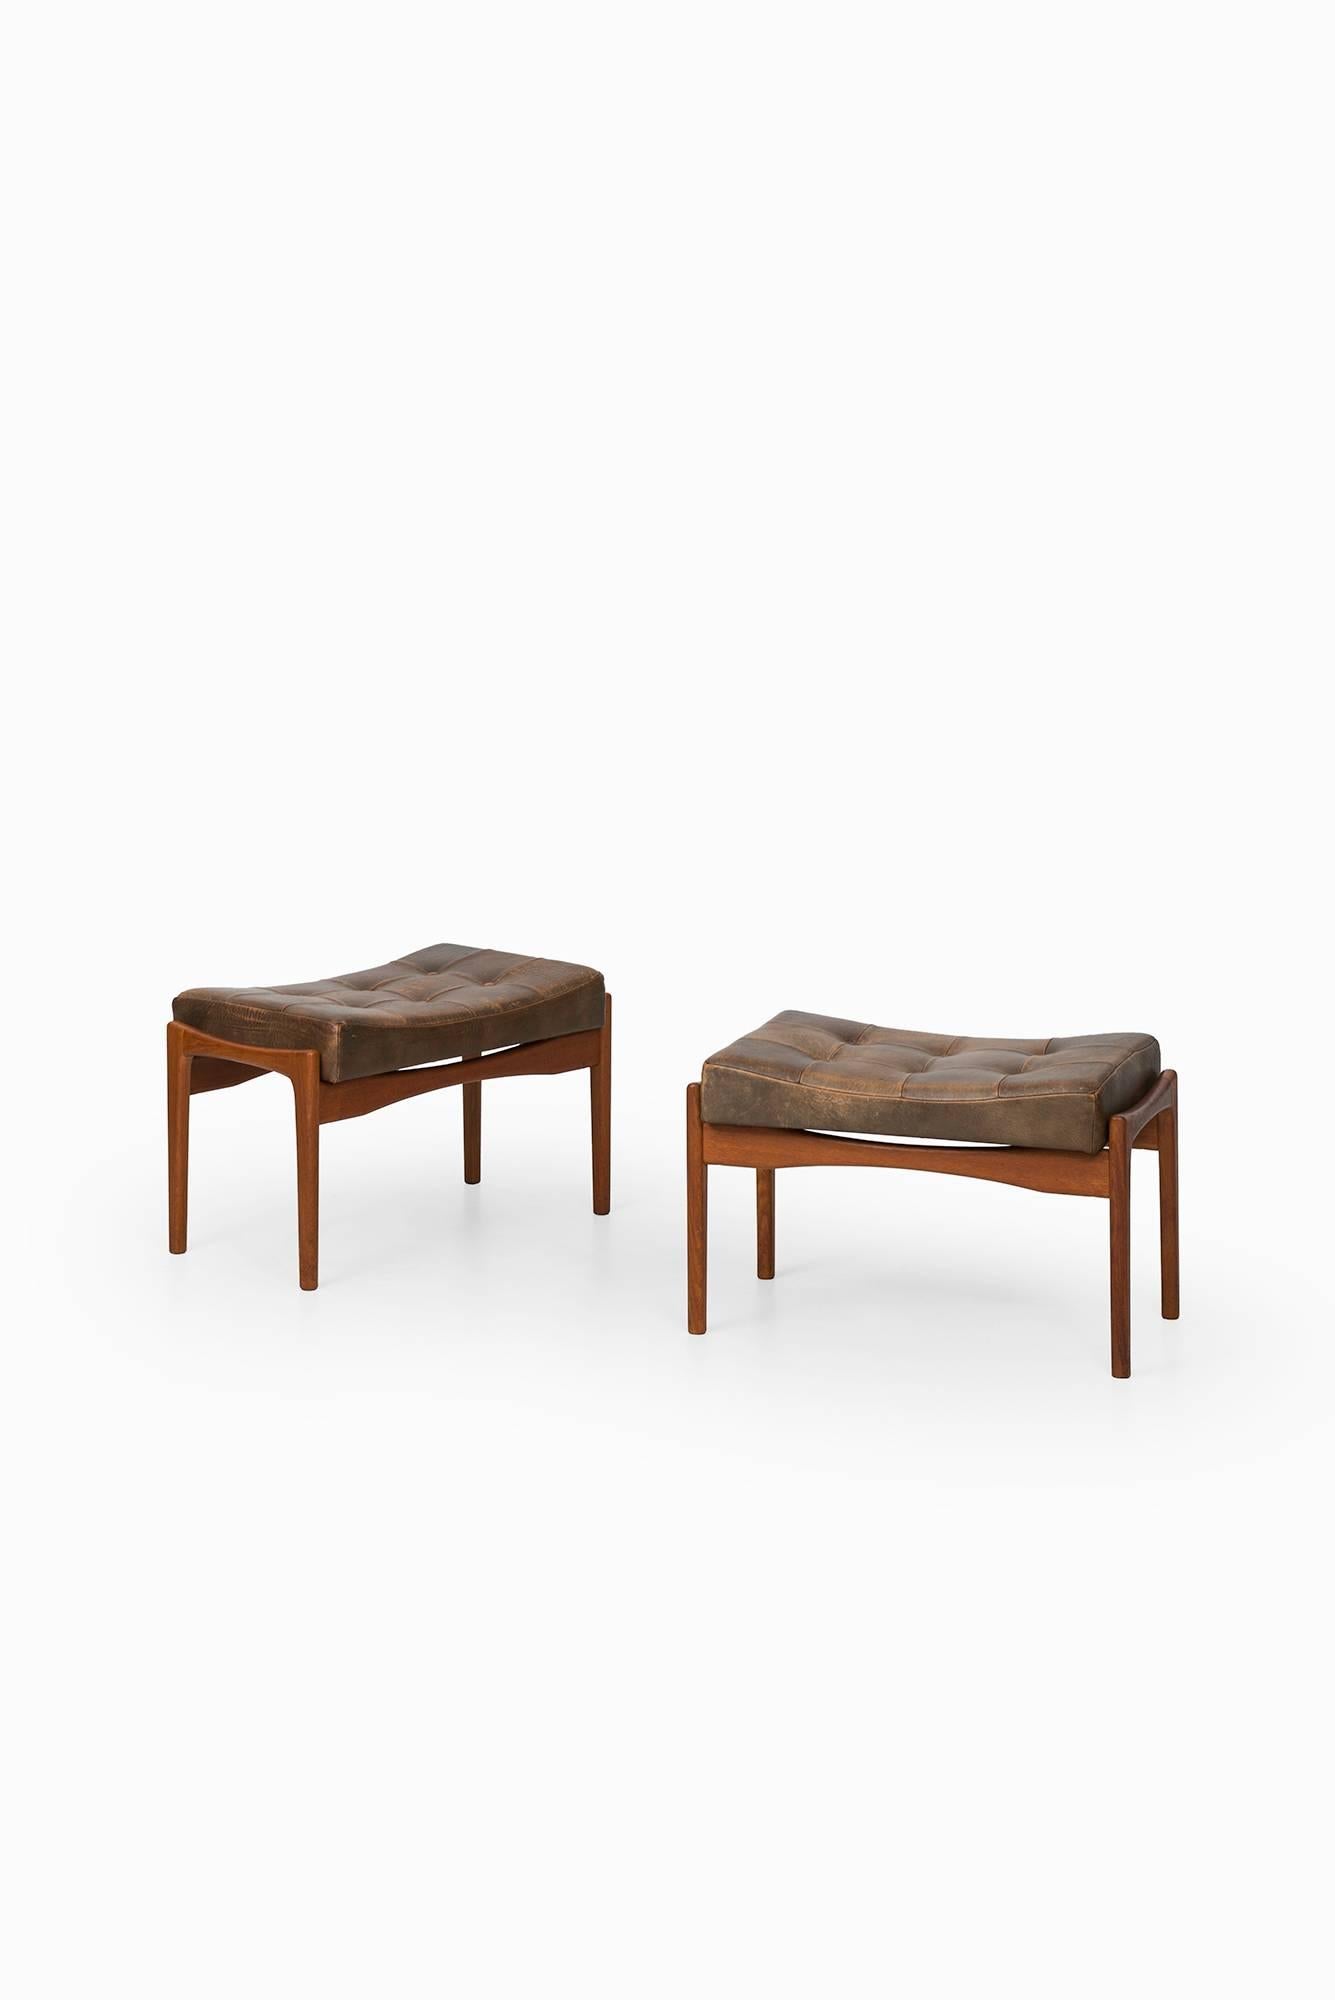 A pair of stools model Siesta designed by Ib Kofod-Larsen. Produced by OPE in Sweden.